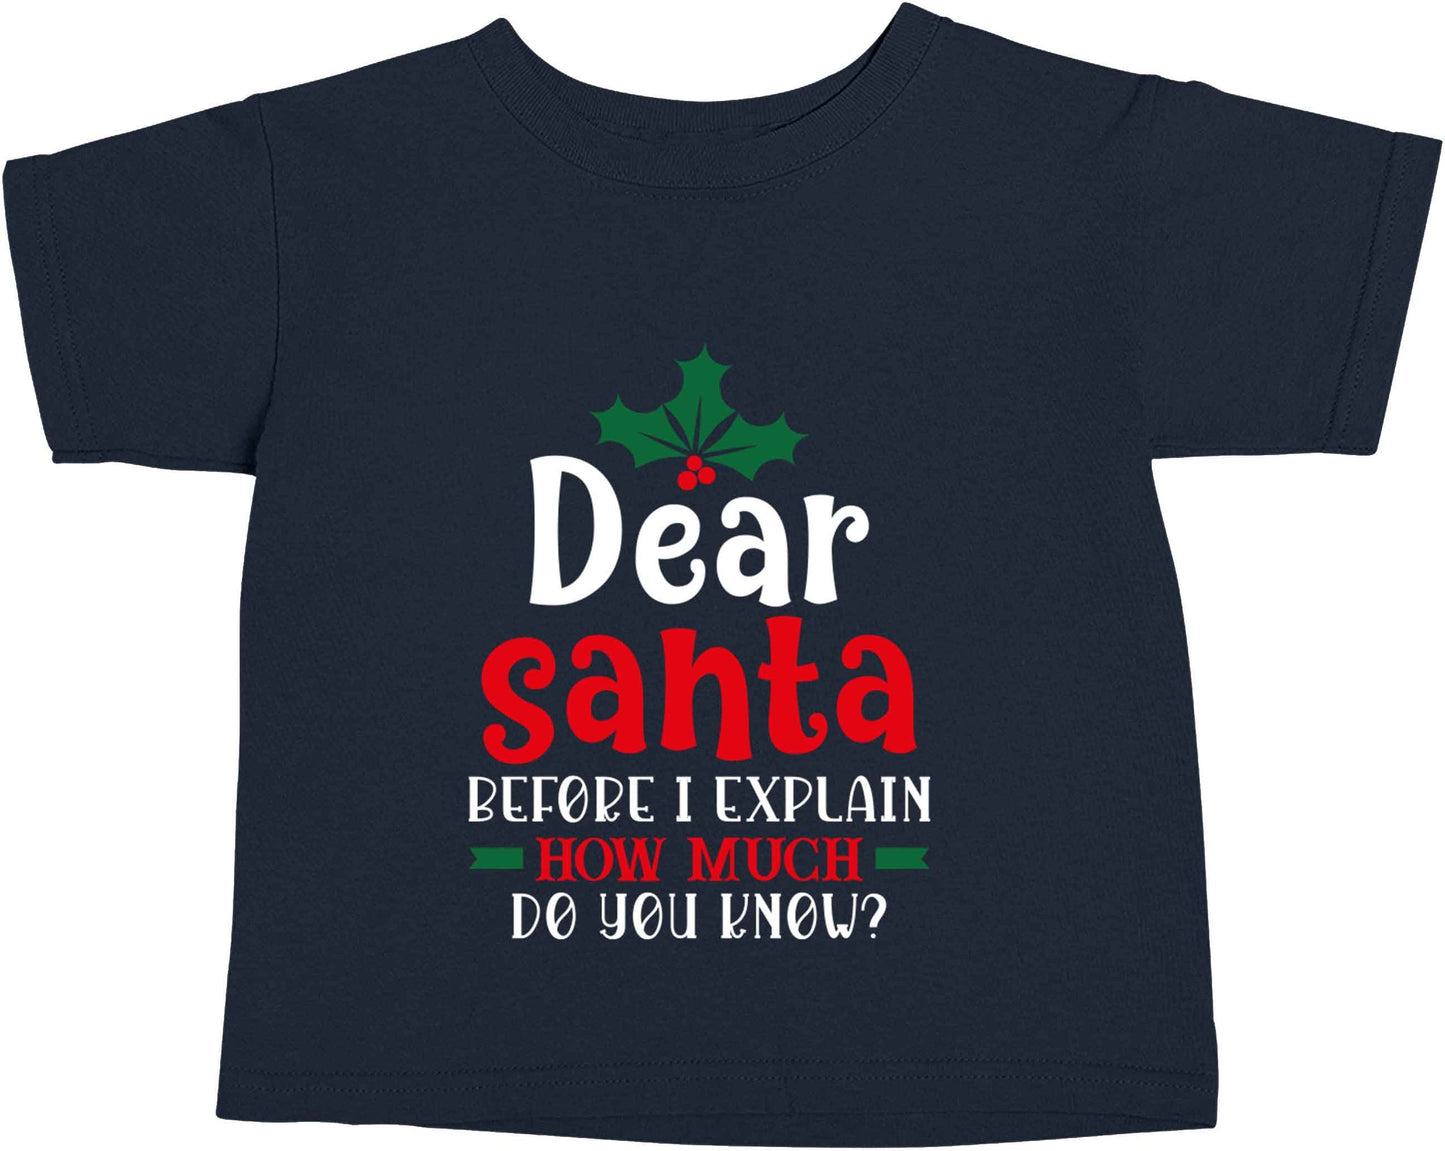 Santa before I explain how much do you know? navy baby toddler Tshirt 2 Years